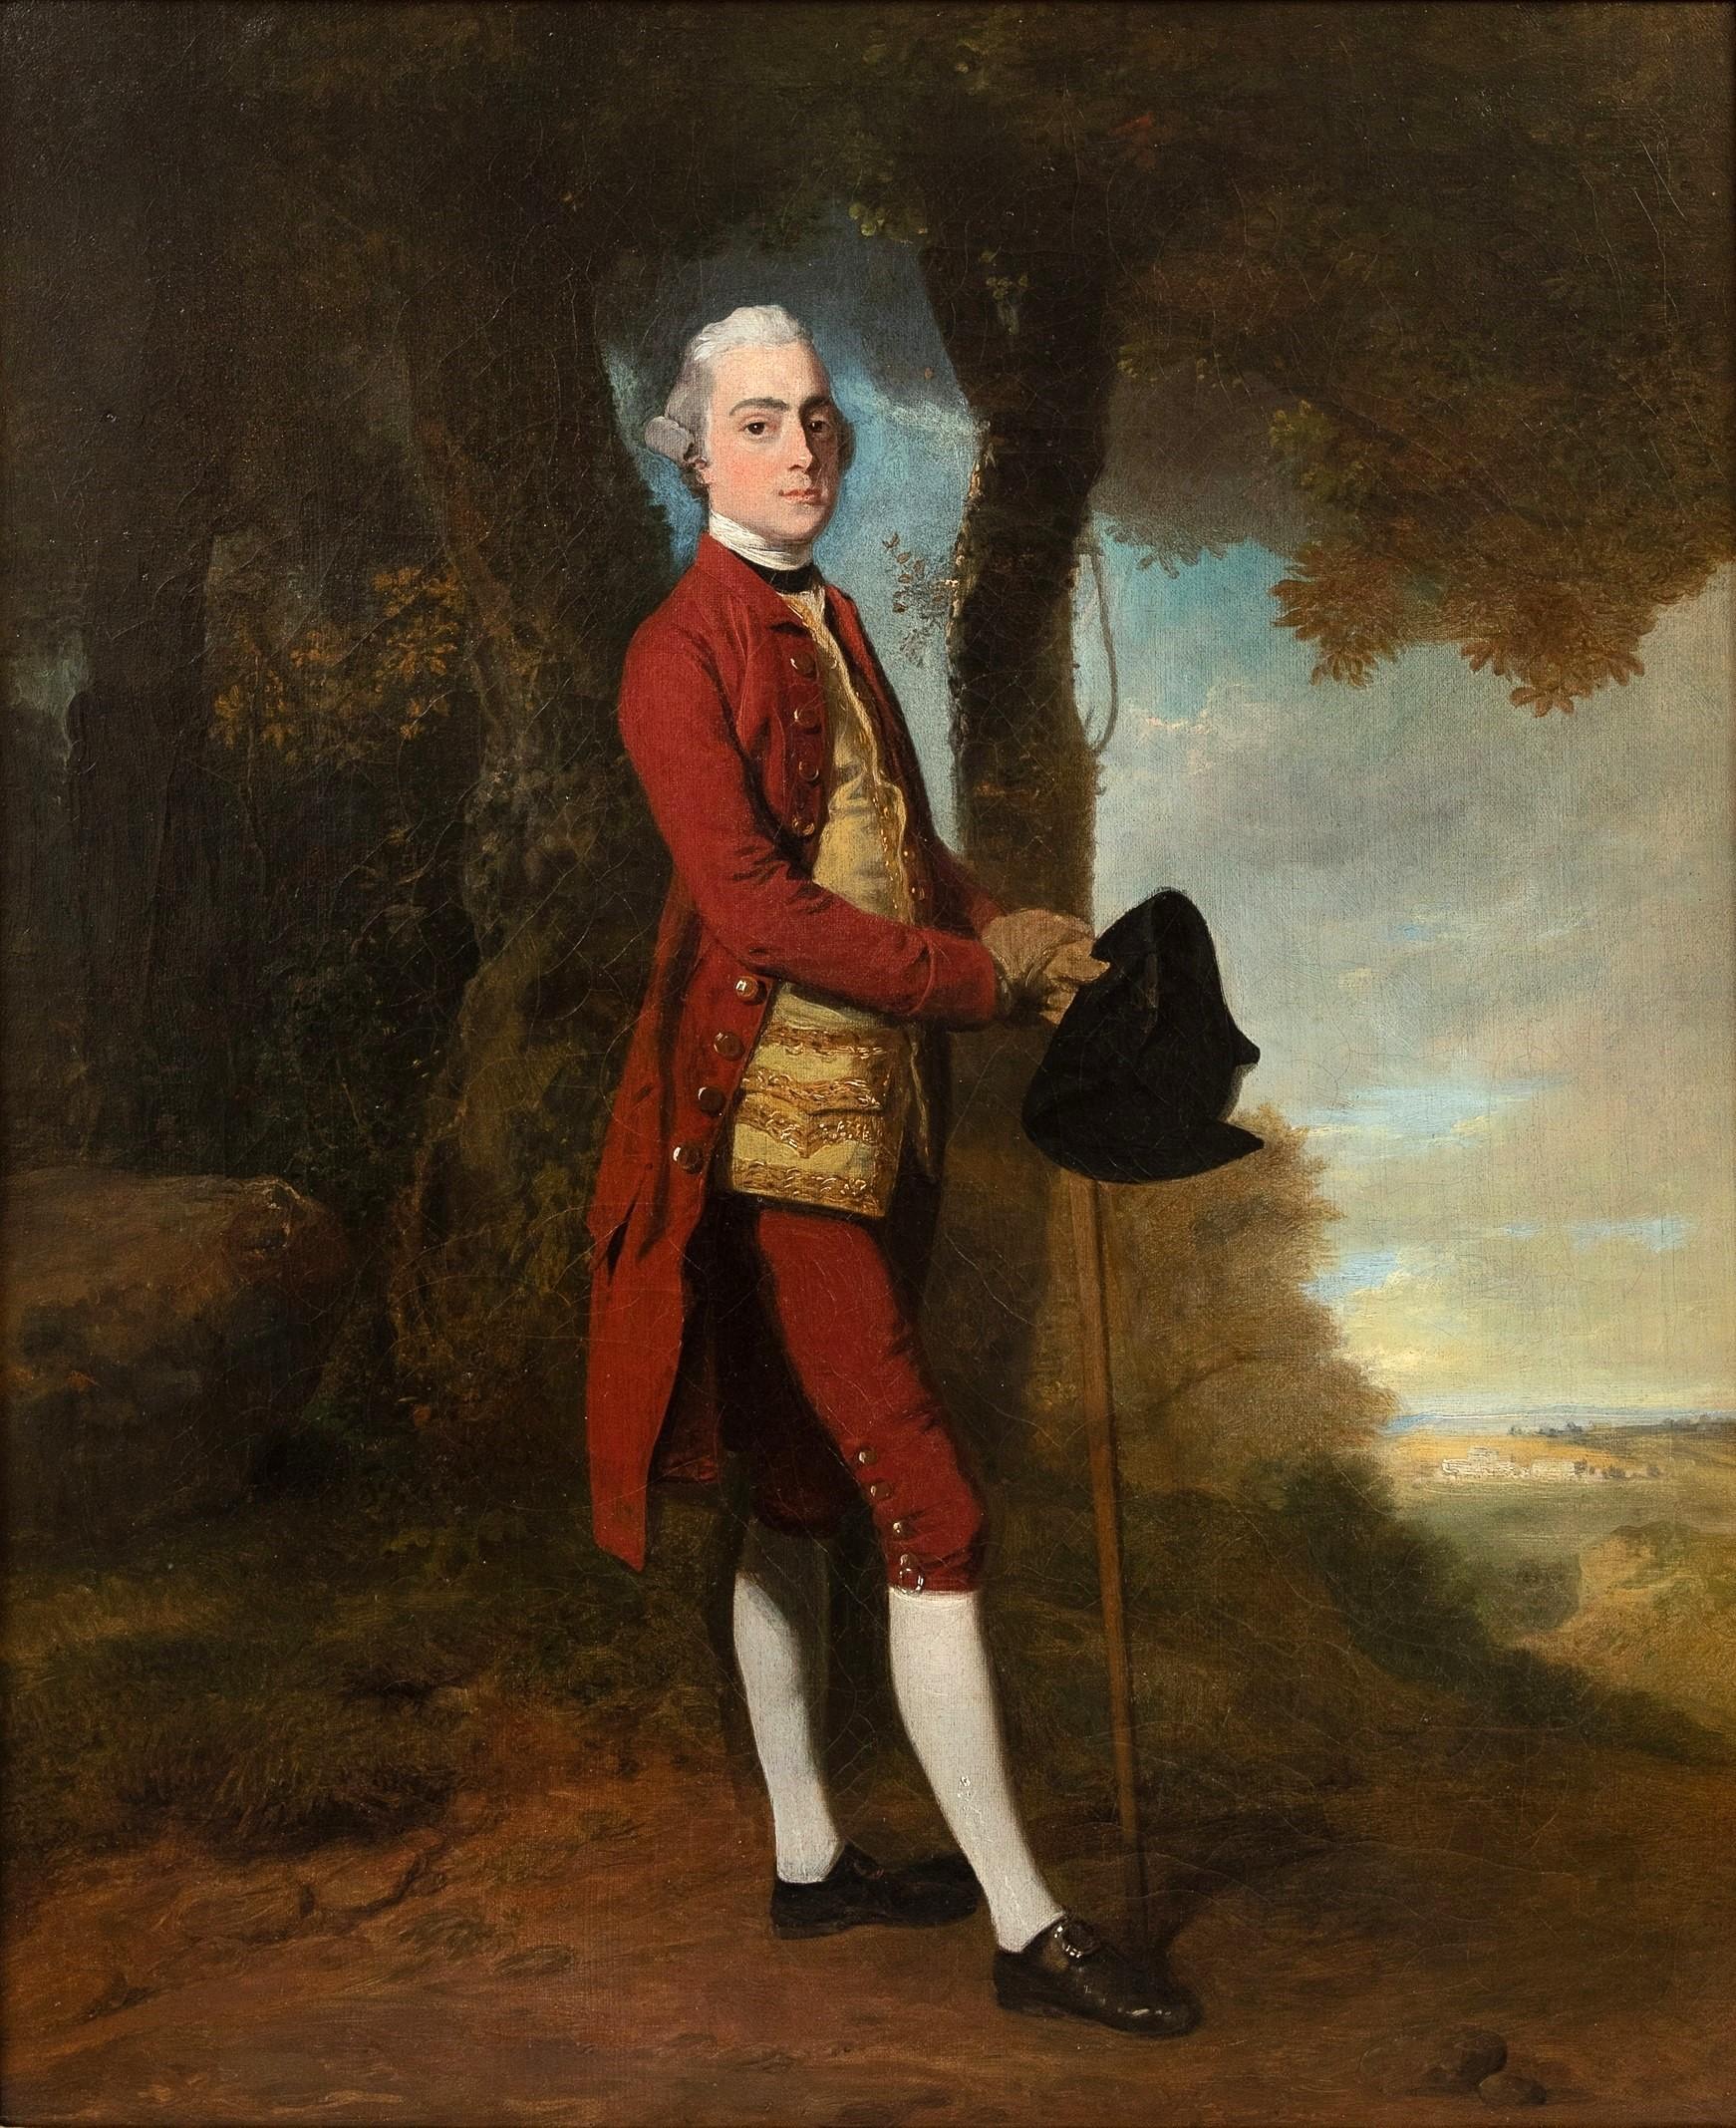 An English 18th century portrait of James Stanley, standing in a landscape - Painting by John Hamilton Mortimer